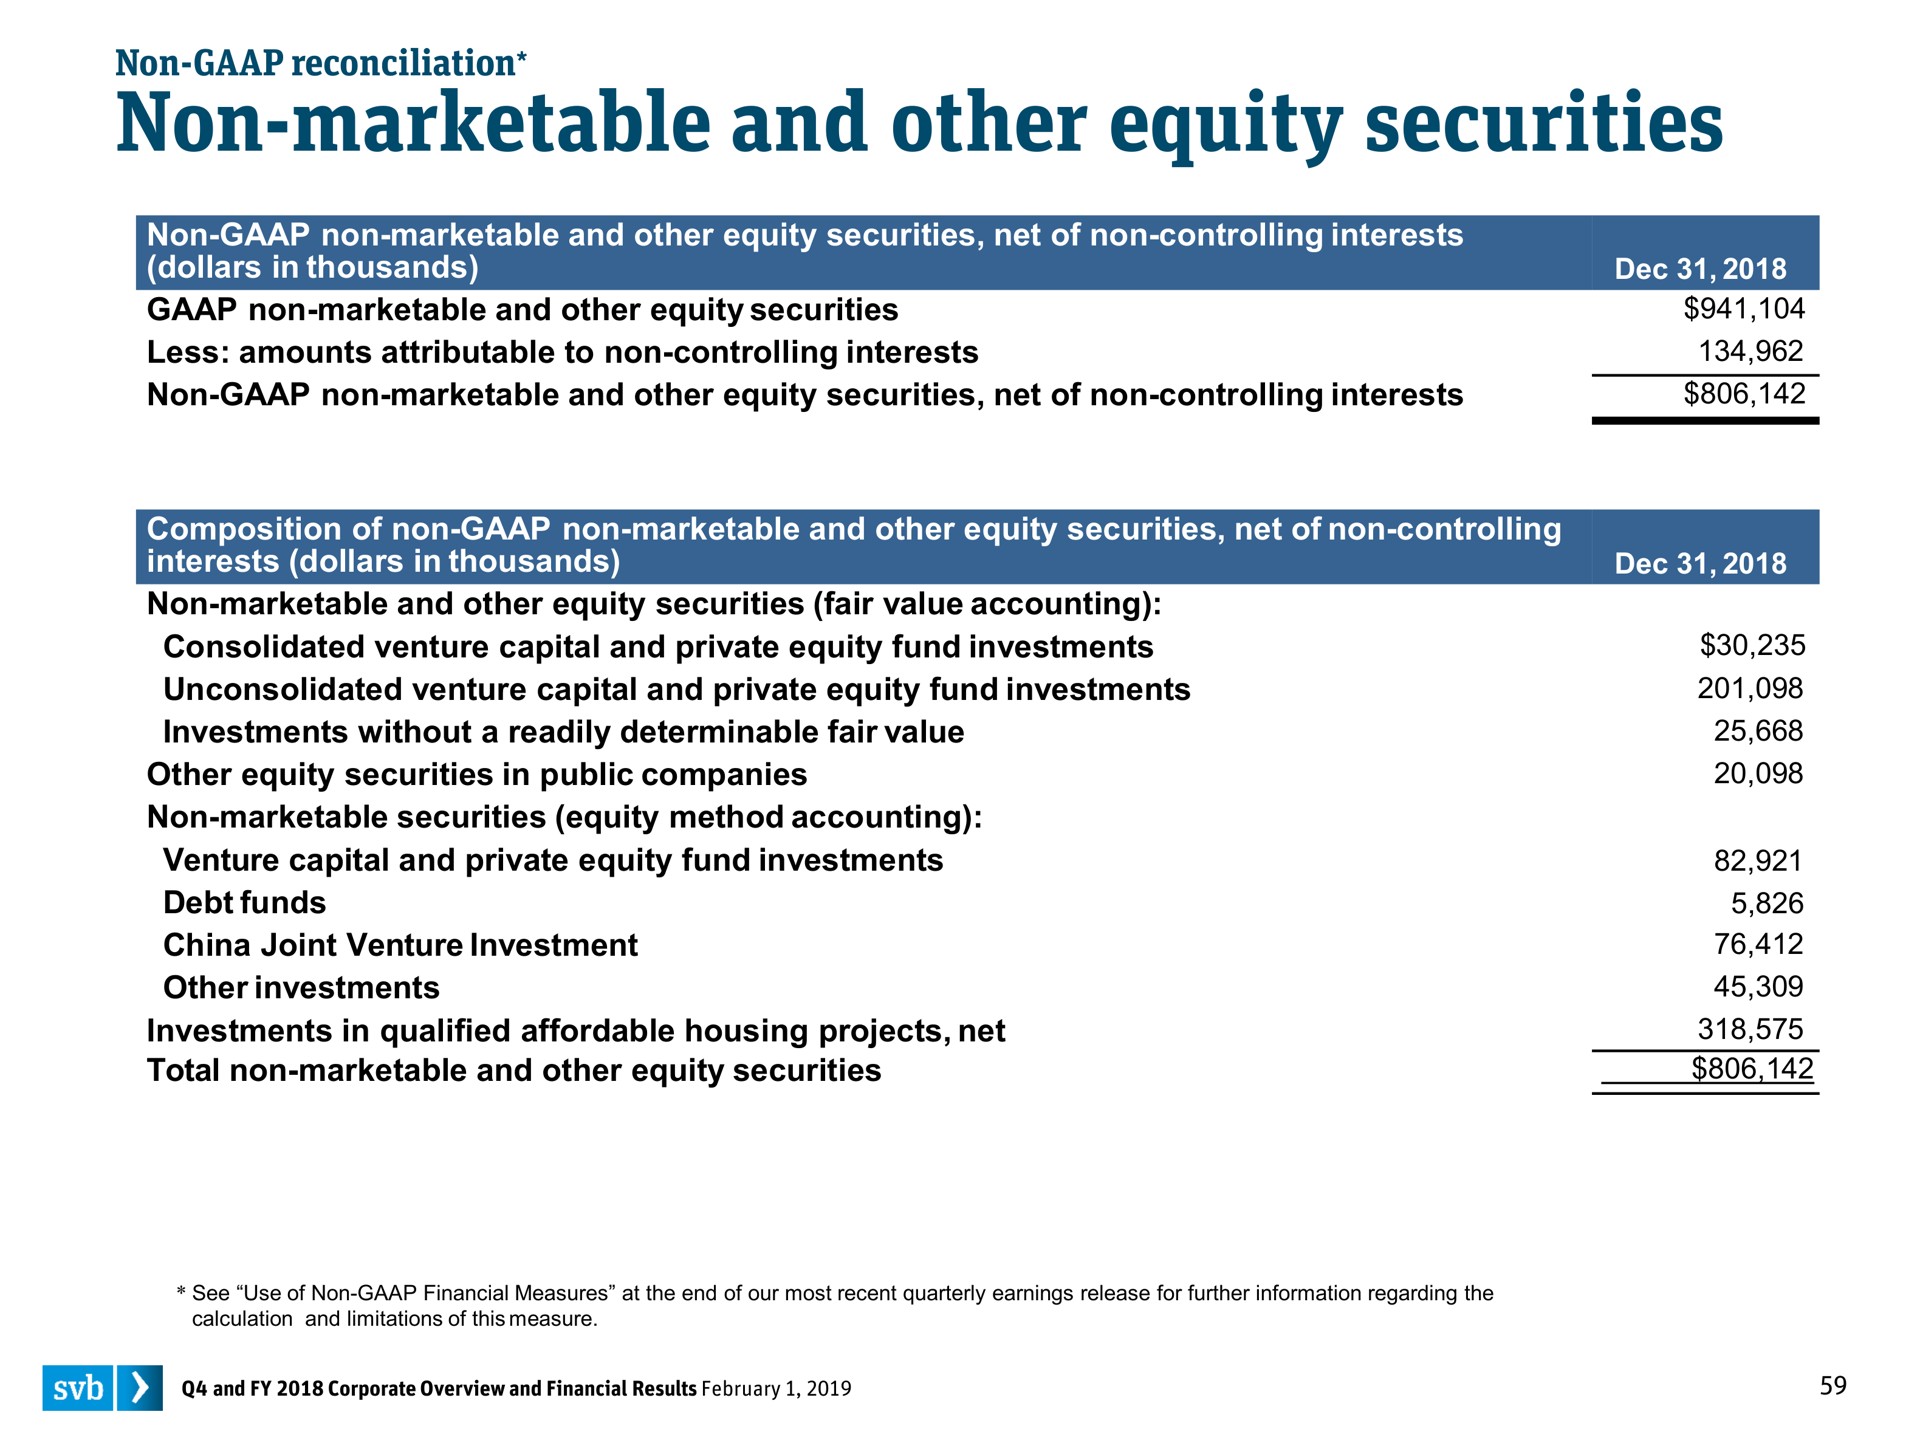 non marketable and other equity securities | Silicon Valley Bank